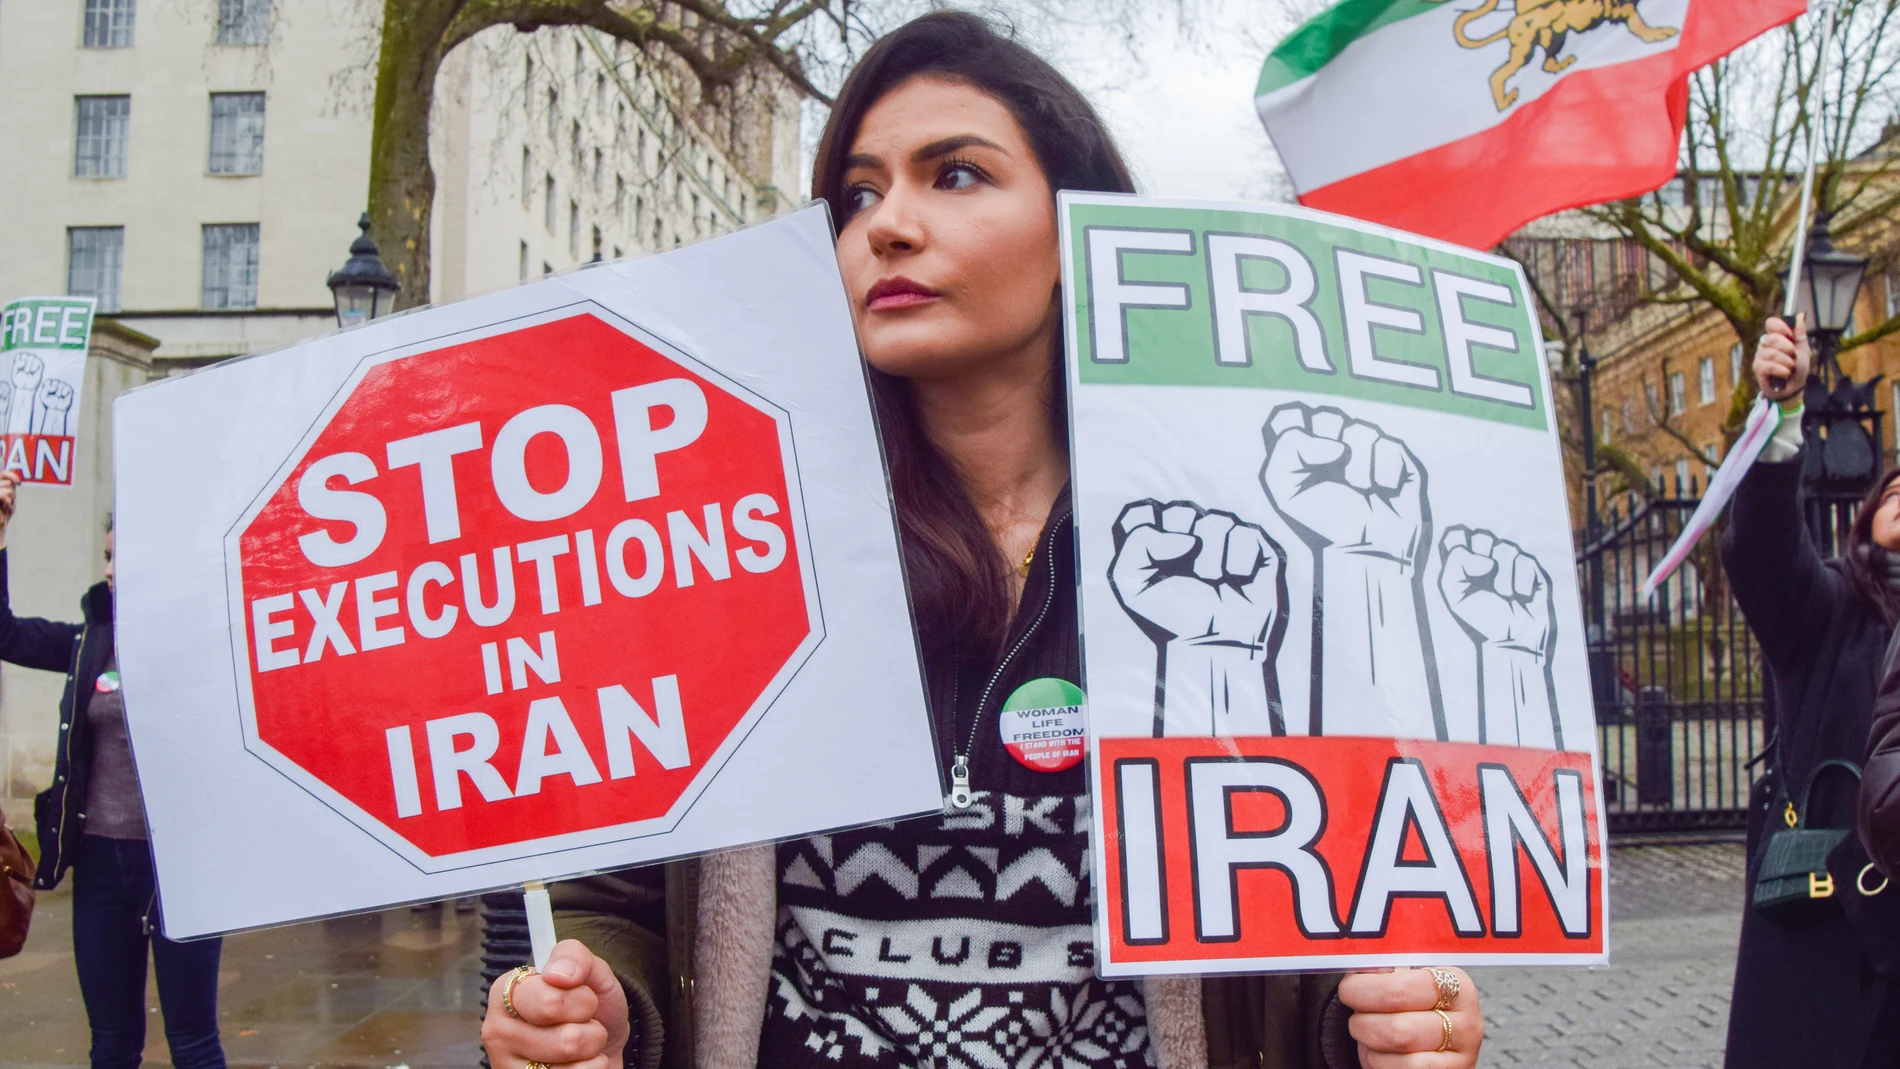 January 14, 2023, London, United Kingdom: A protester holds 'Stop executions in Iran' and 'Free Iran' placards during the demonstration. Demonstrators gathered outside Downing Street in protest against executions in Iran and in support of freedom for Iran.
  (Foto de ARCHIVO)
14/01/2023